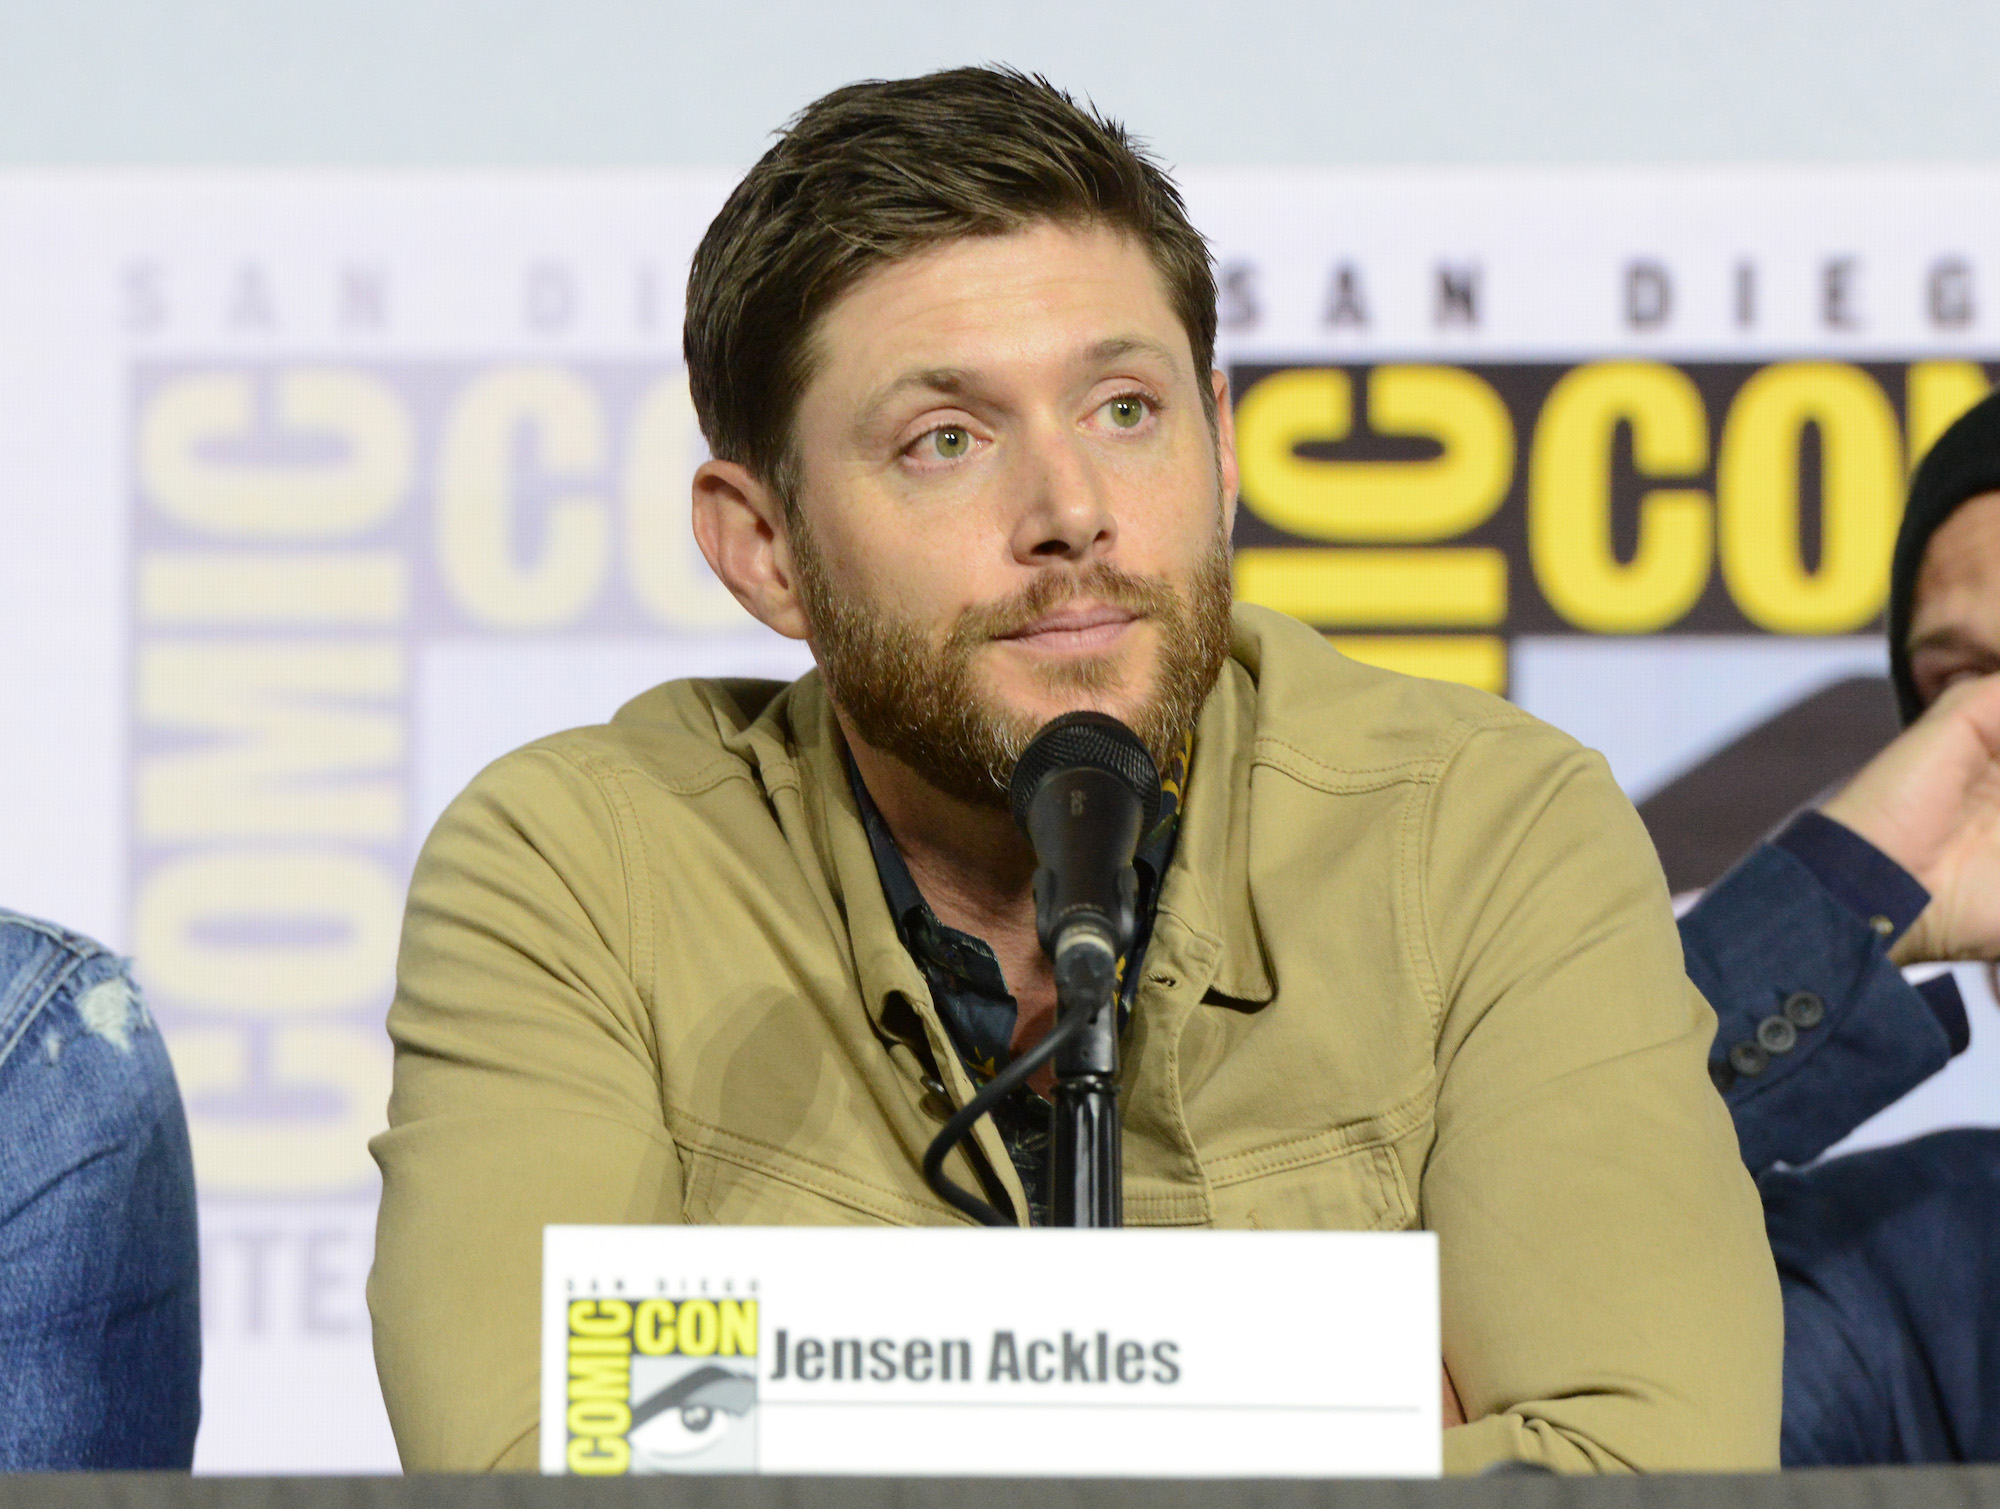 Jensen Ackles speaks into a microphone at a Comic-Con 'Supernatural' panel